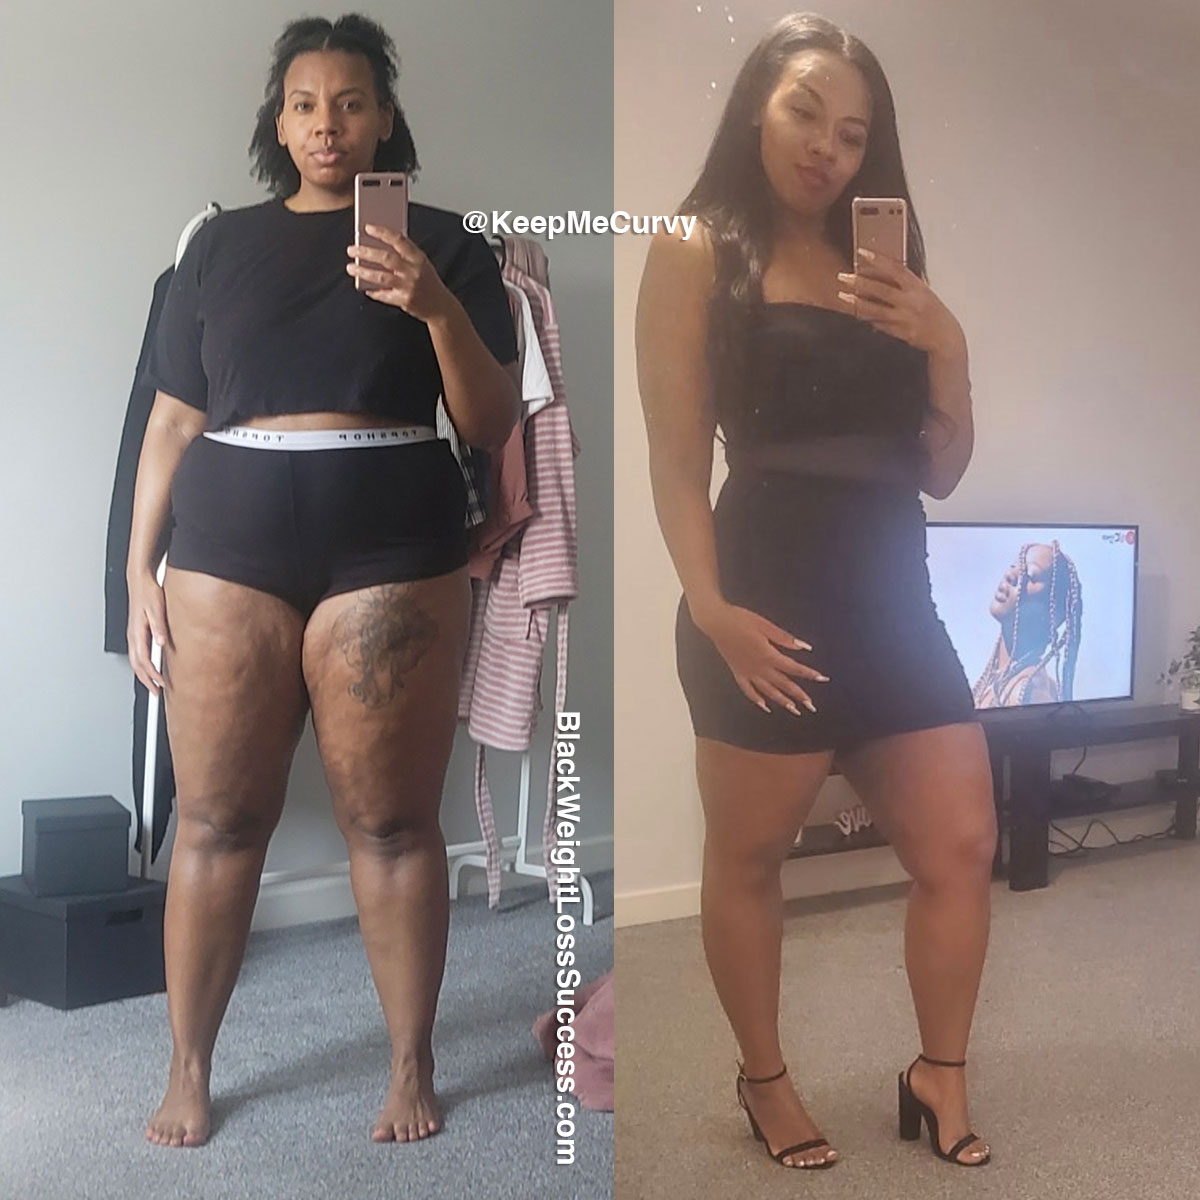 Carrissa lost 84 pounds